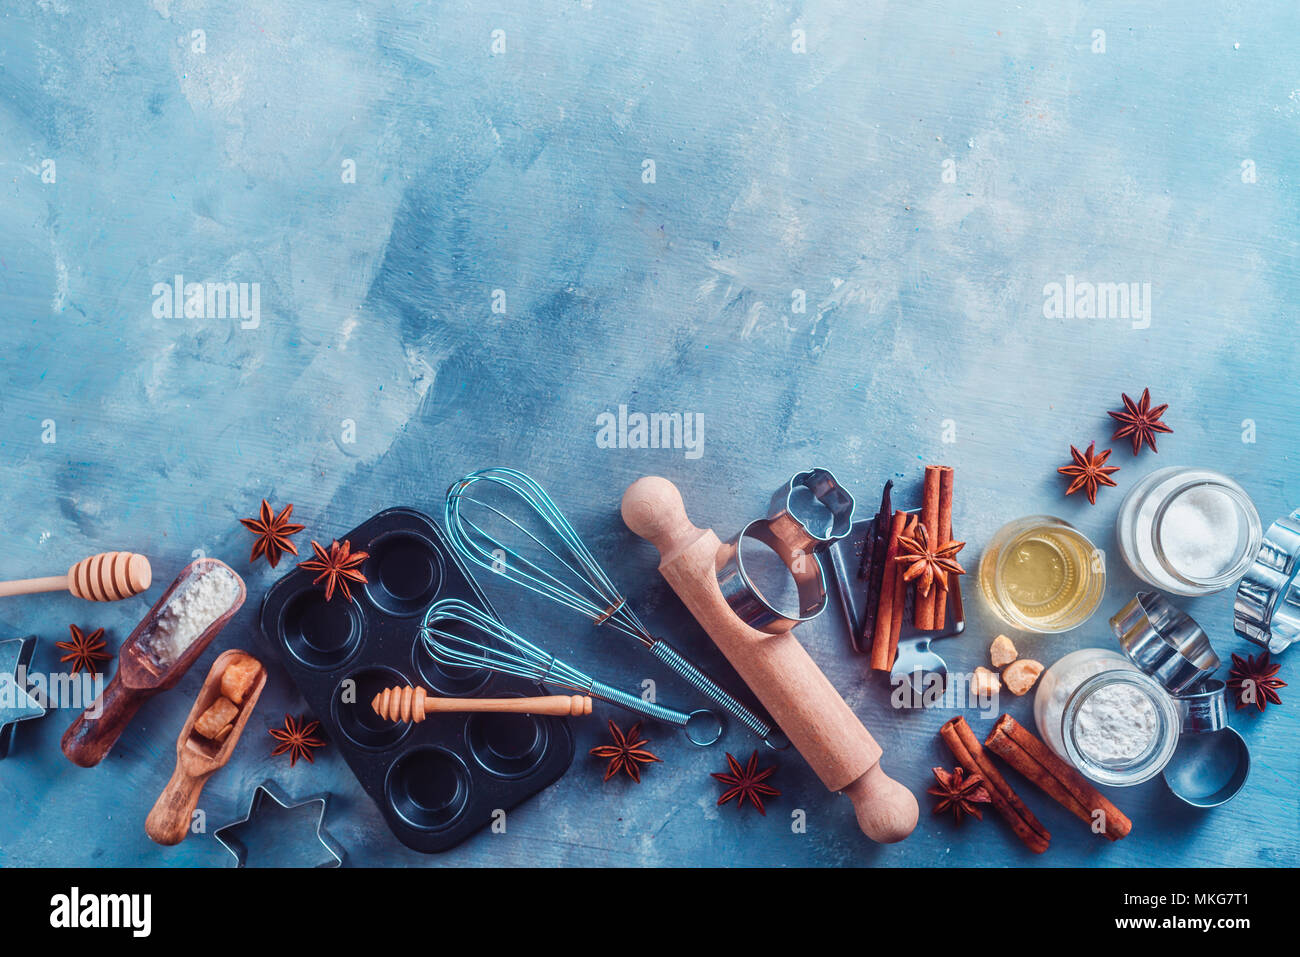 Making pastry concept with baking tools and ingredients on a modern concrete background with copy space. Wooden scoops, whisks, cookie cutters, muffin tin, sugar, flour, anise stars from above. Stock Photo